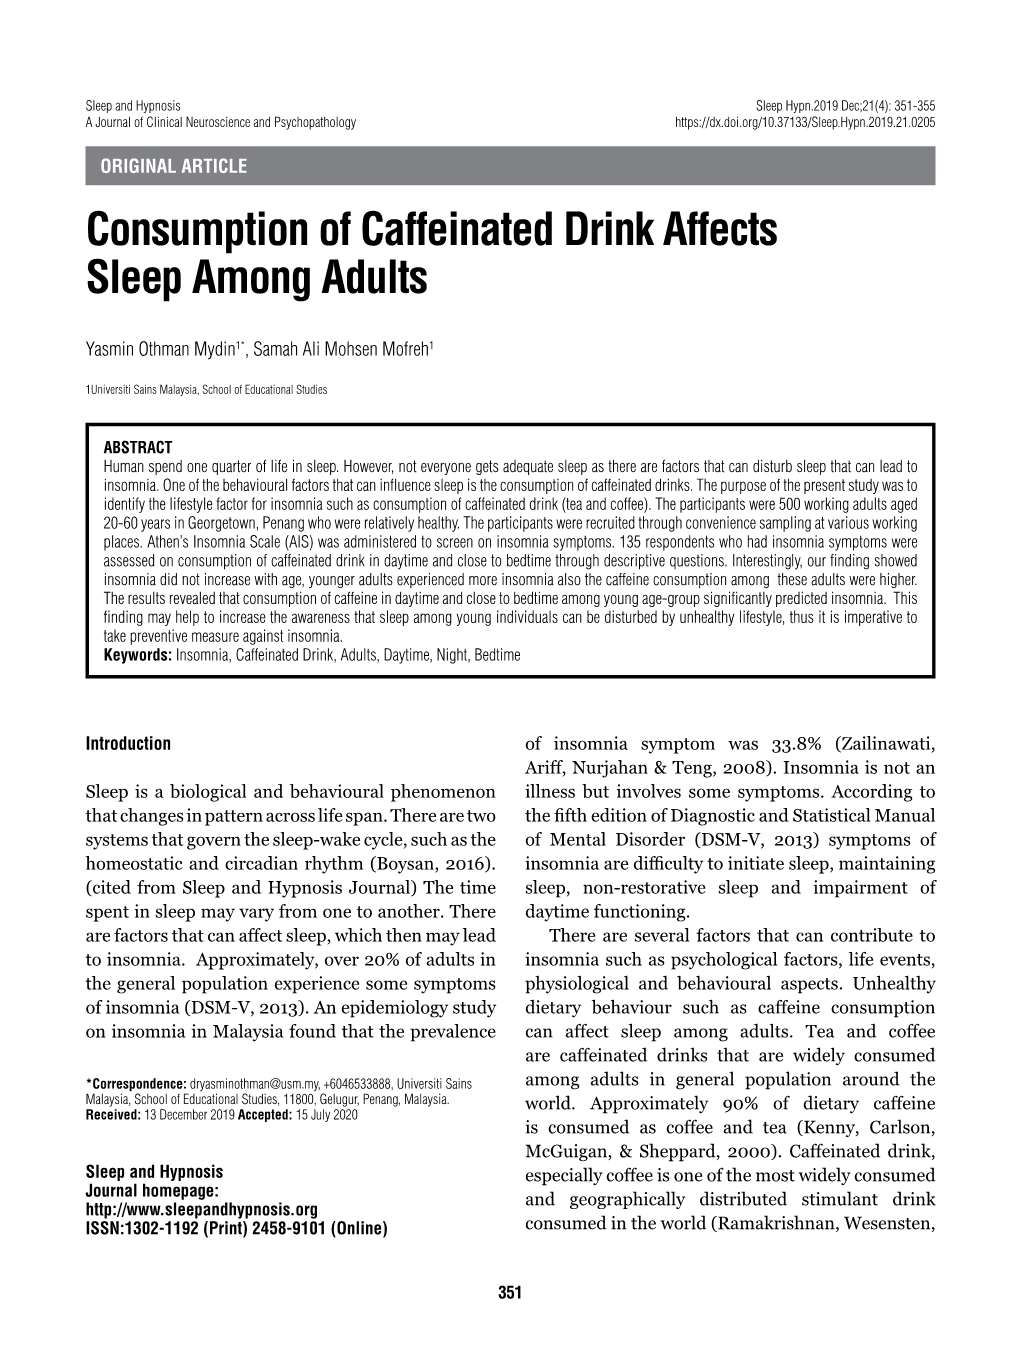 Consumption of Caffeinated Drink Affects Sleep Among Adults